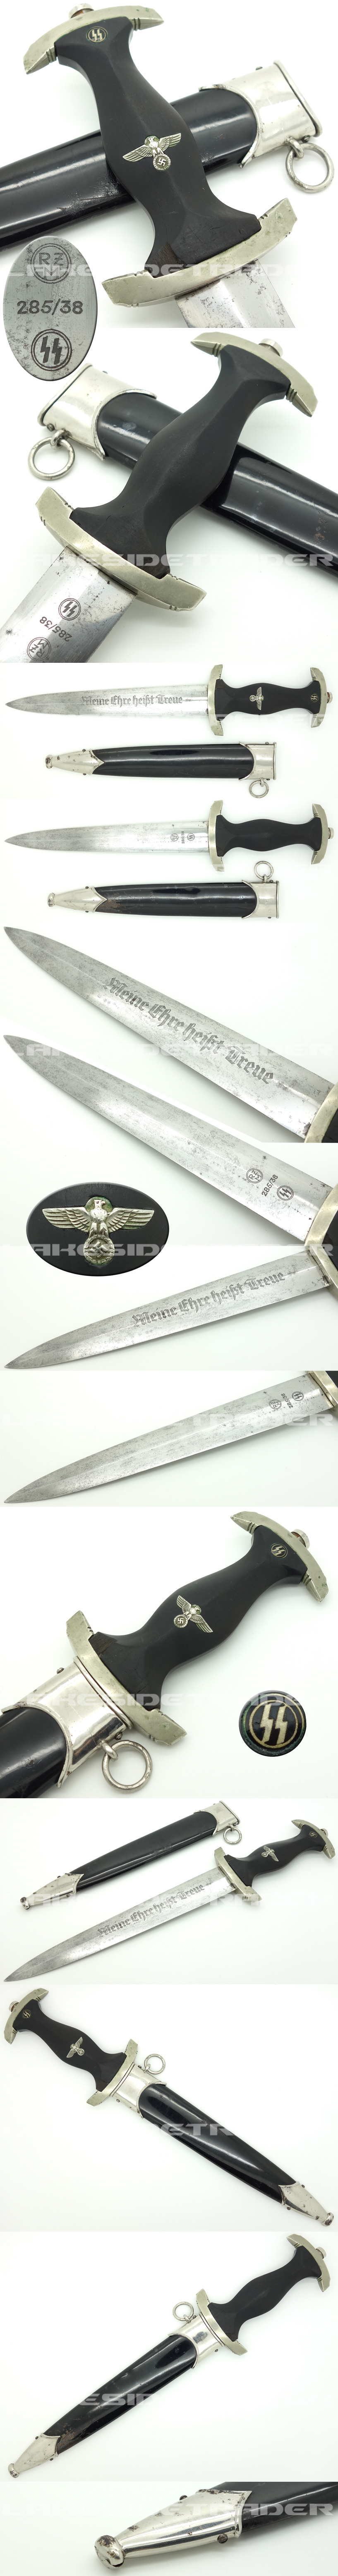 Rare - SS Dagger by RZM 285/38 1938